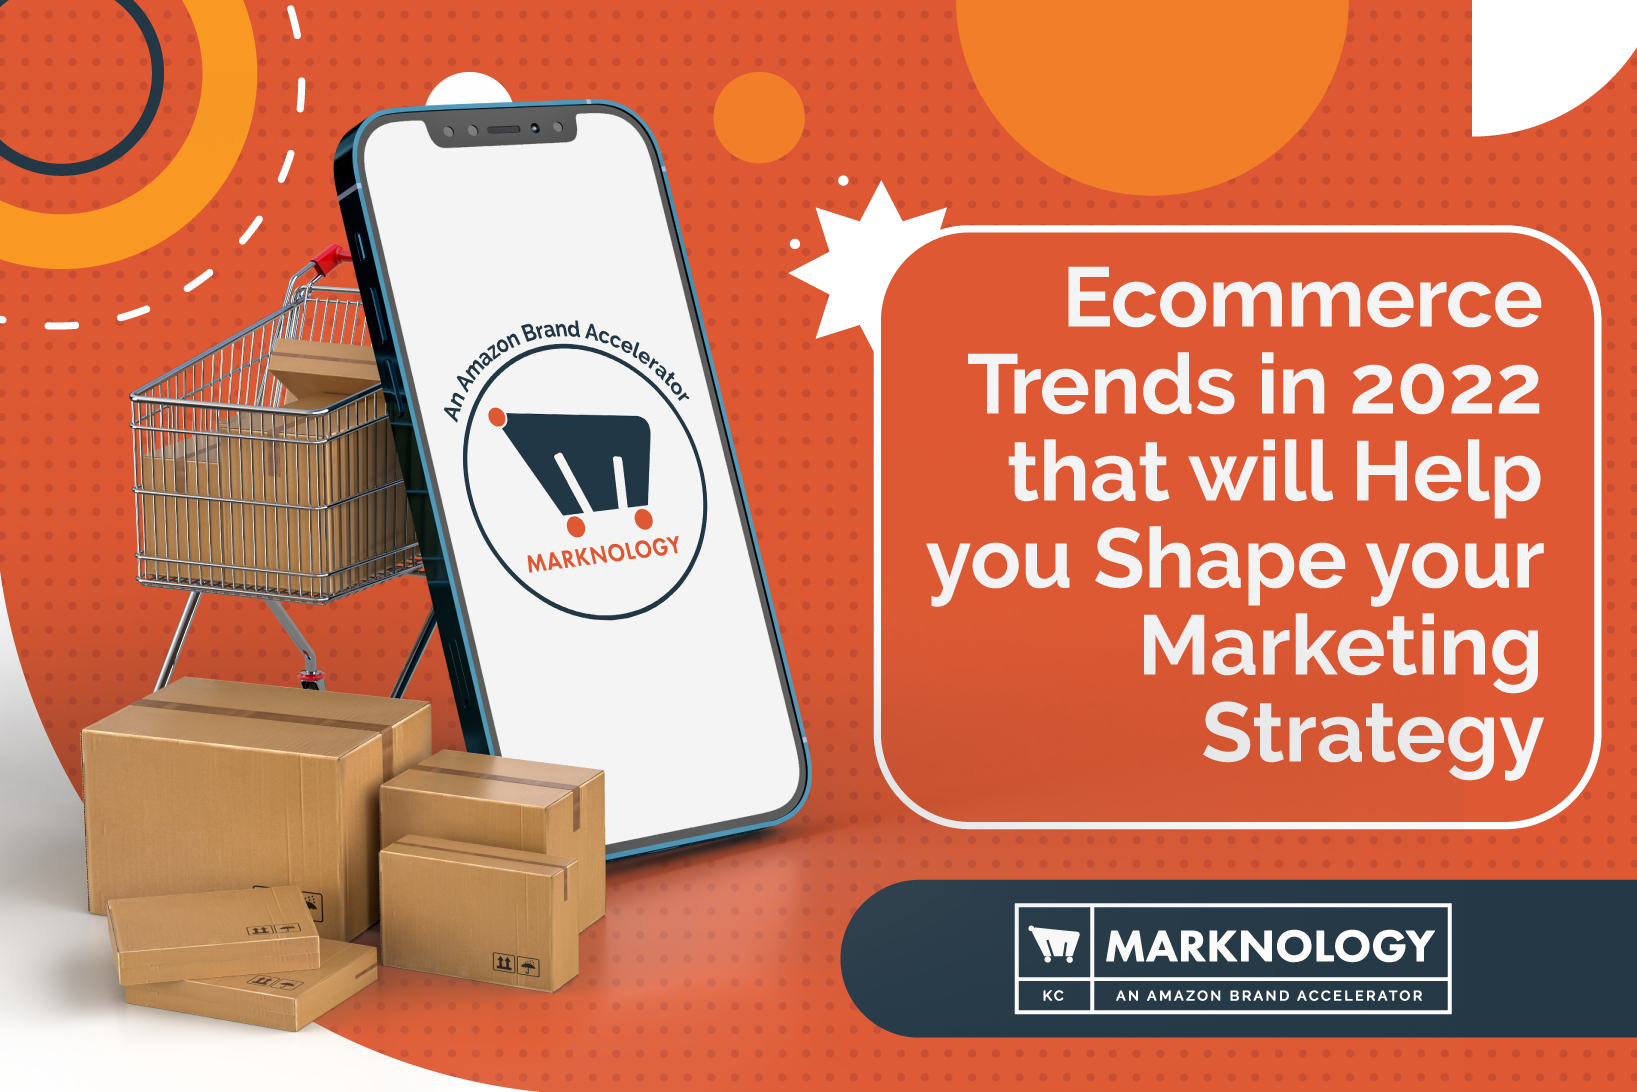 Ecommerce Trends in 2022 that will Help you Shape your Marketing Strategy